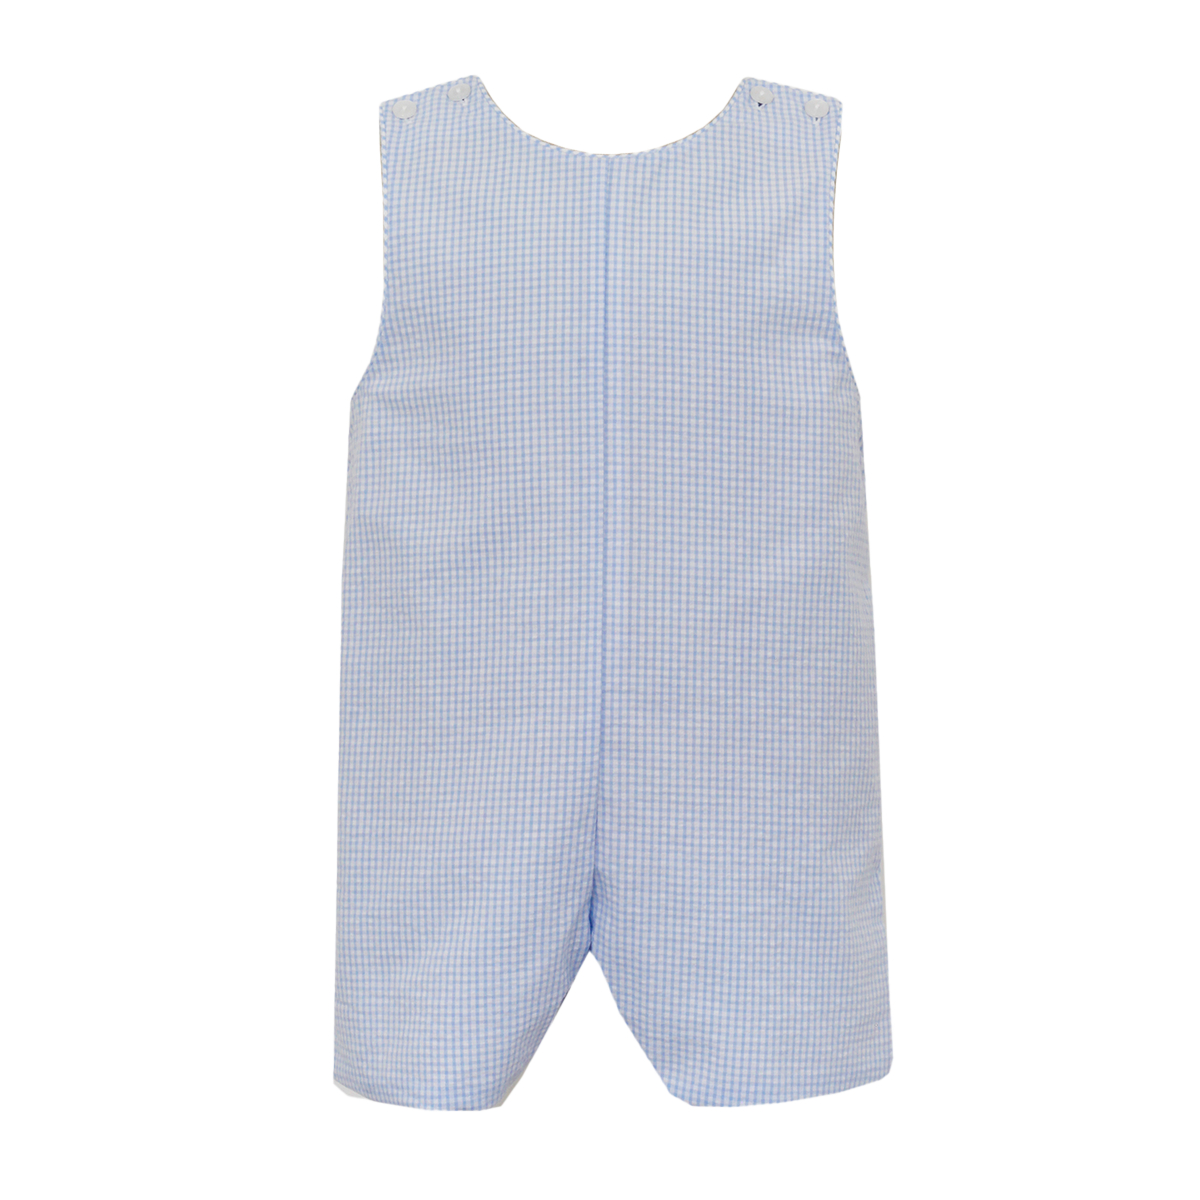 Boy's Blue Gingham Seersucker Shortall by Claire & Charlie